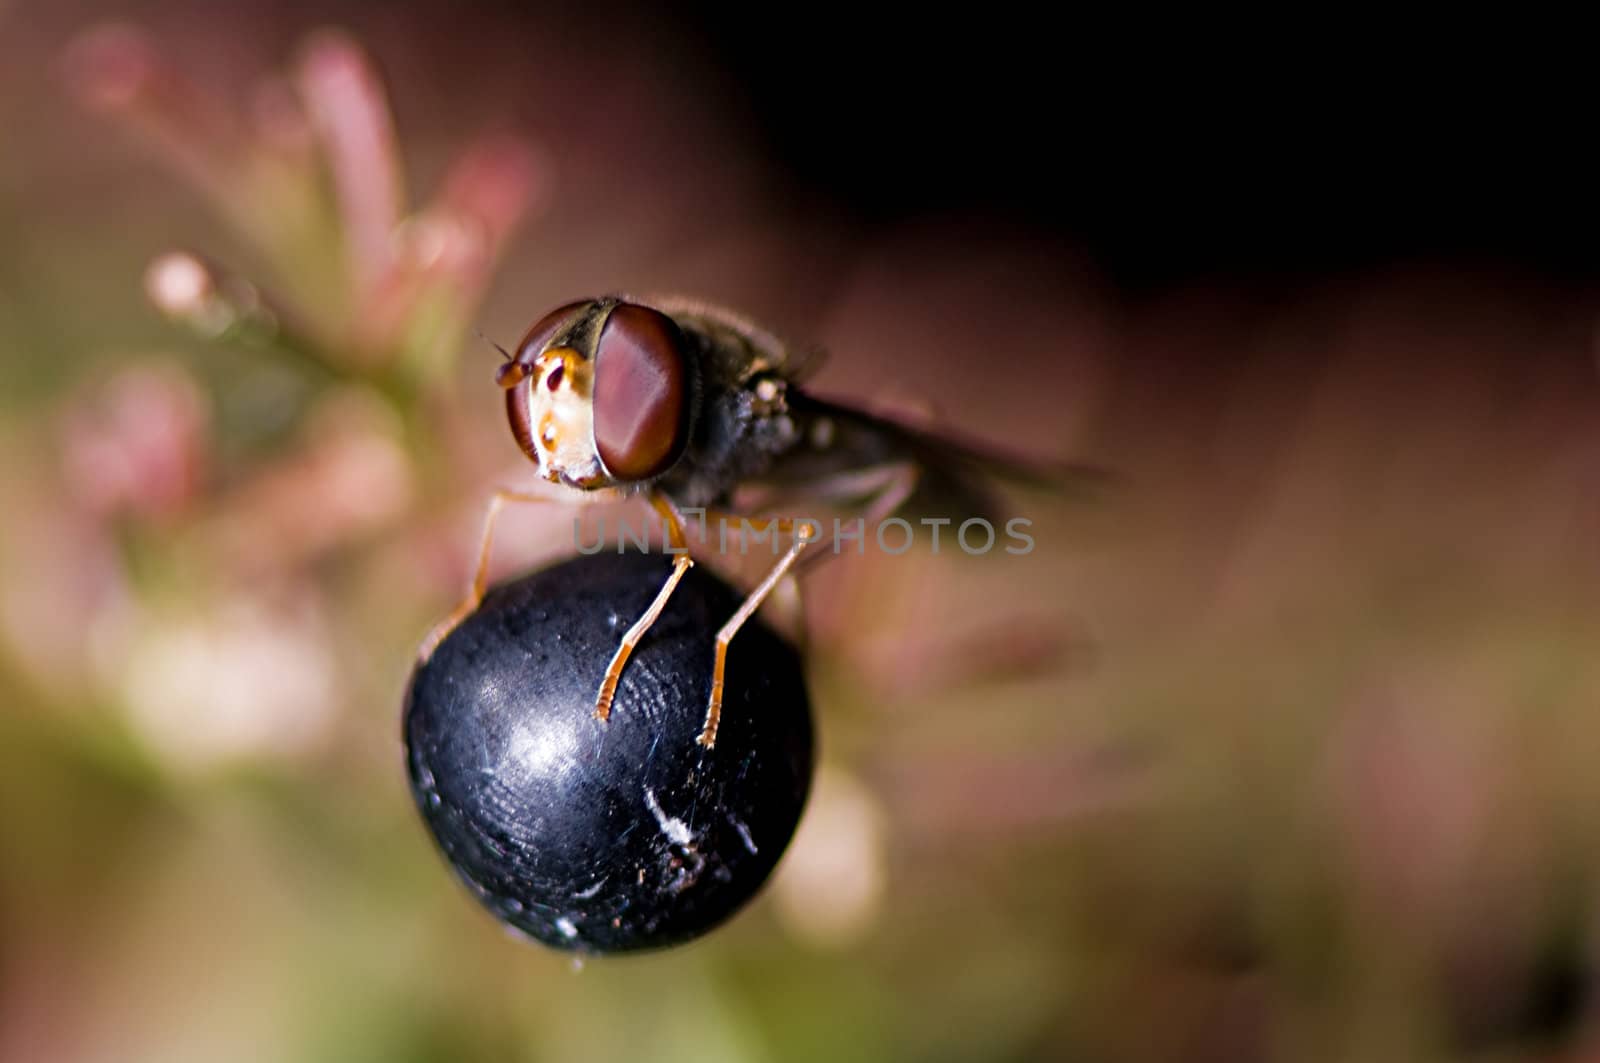 Hoverfly sitting on a black berry taking the sun